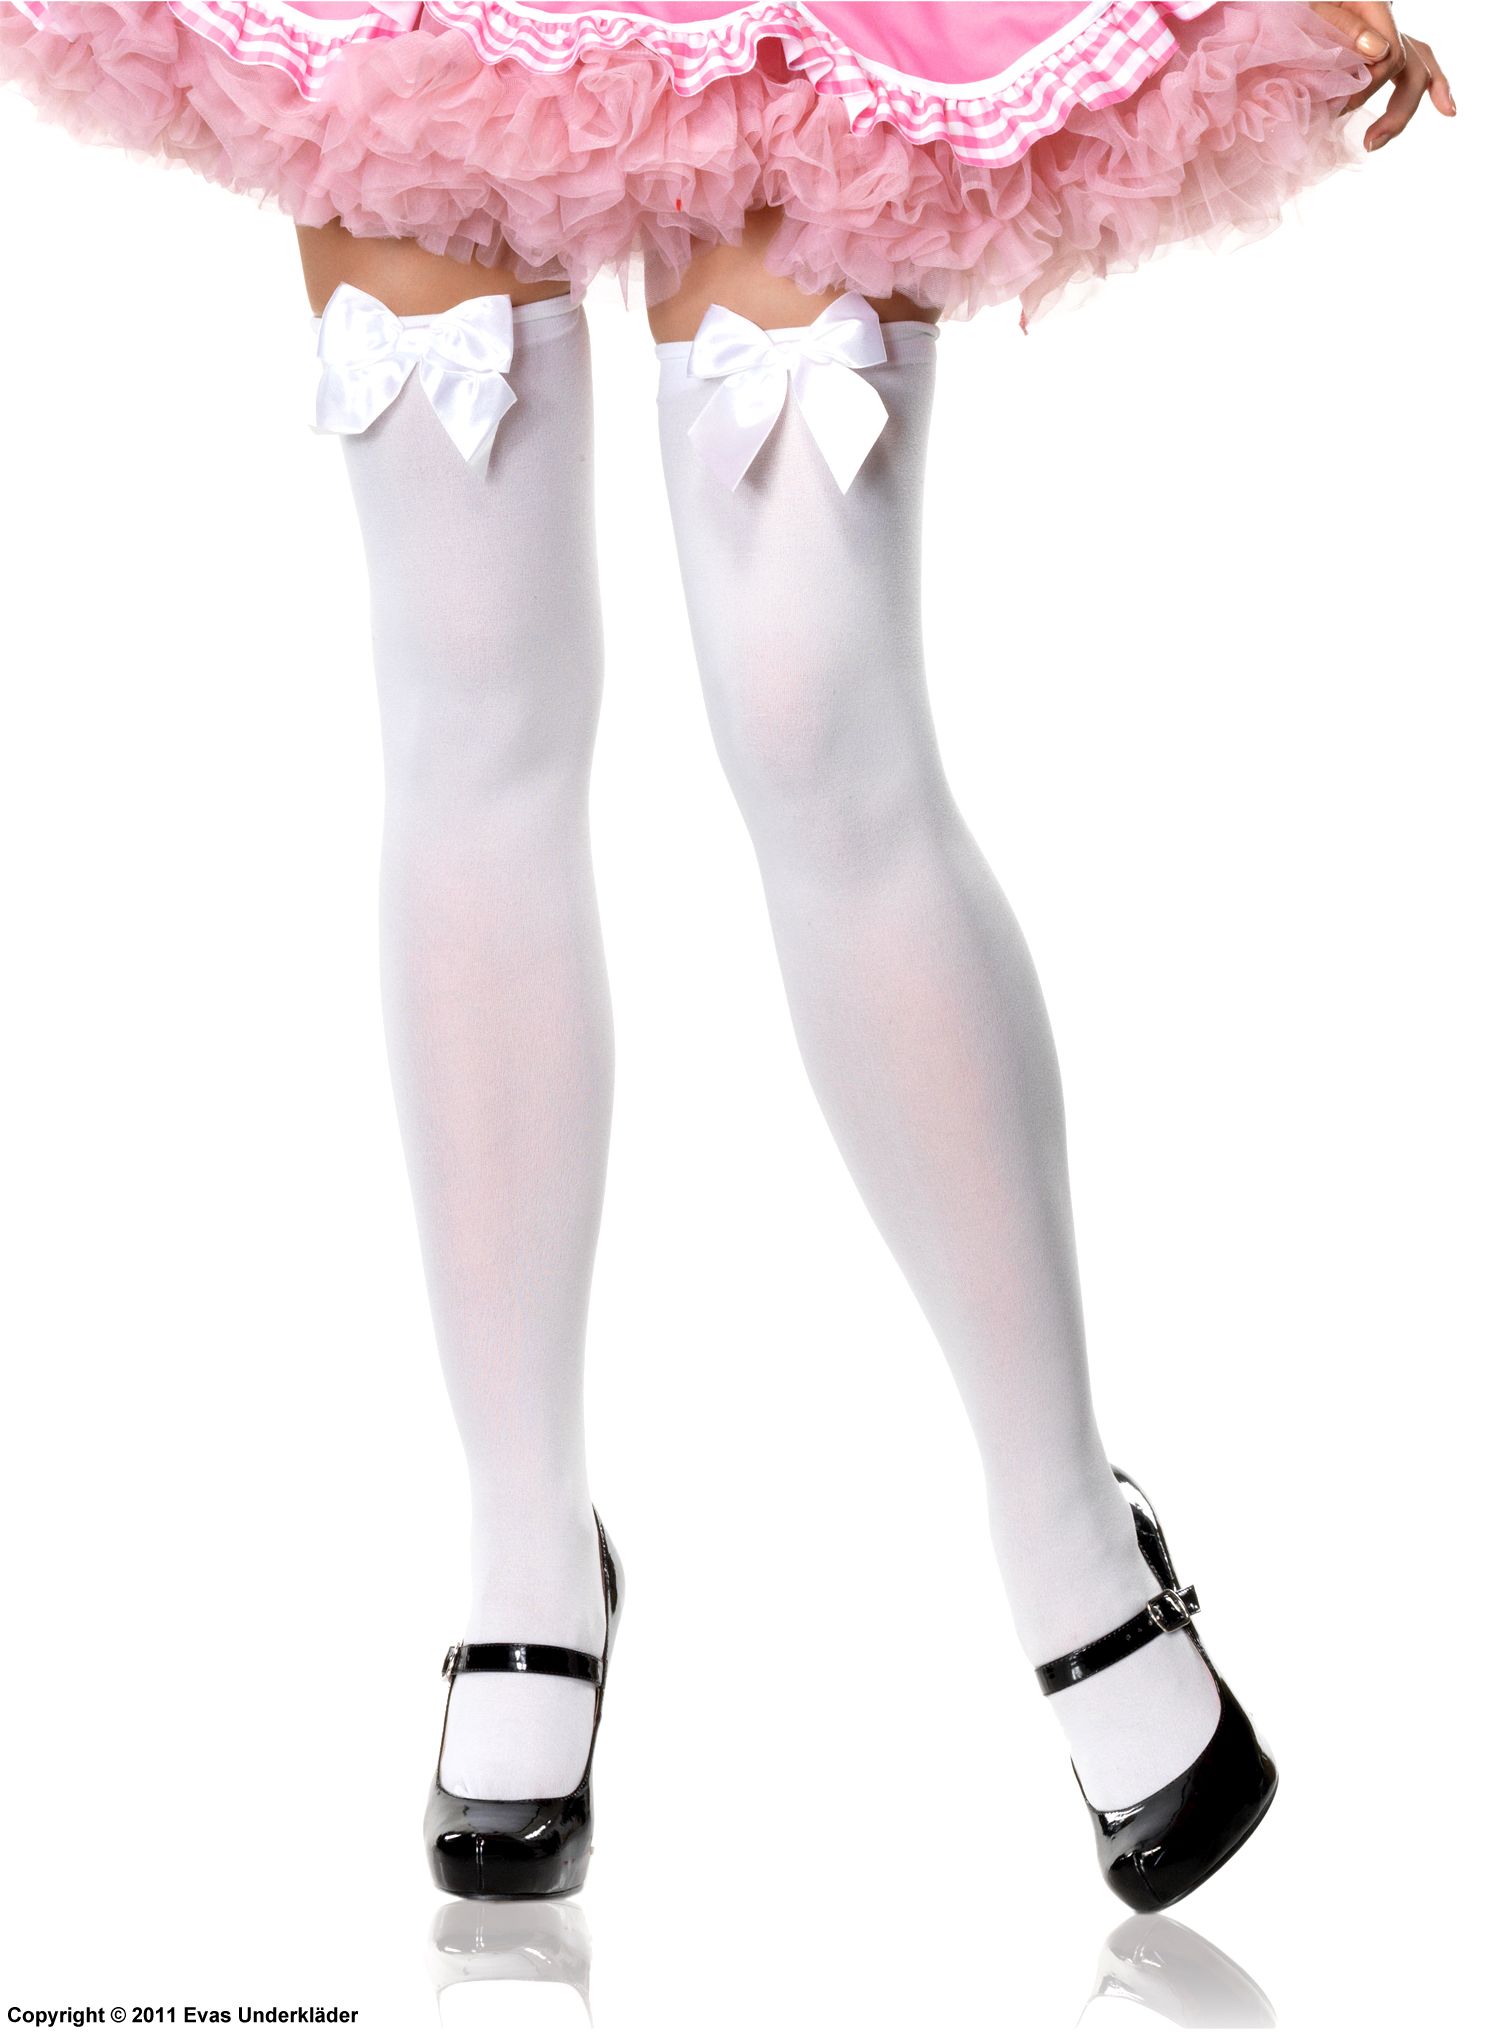 Thigh high stay-ups, opaque fabric, big bow